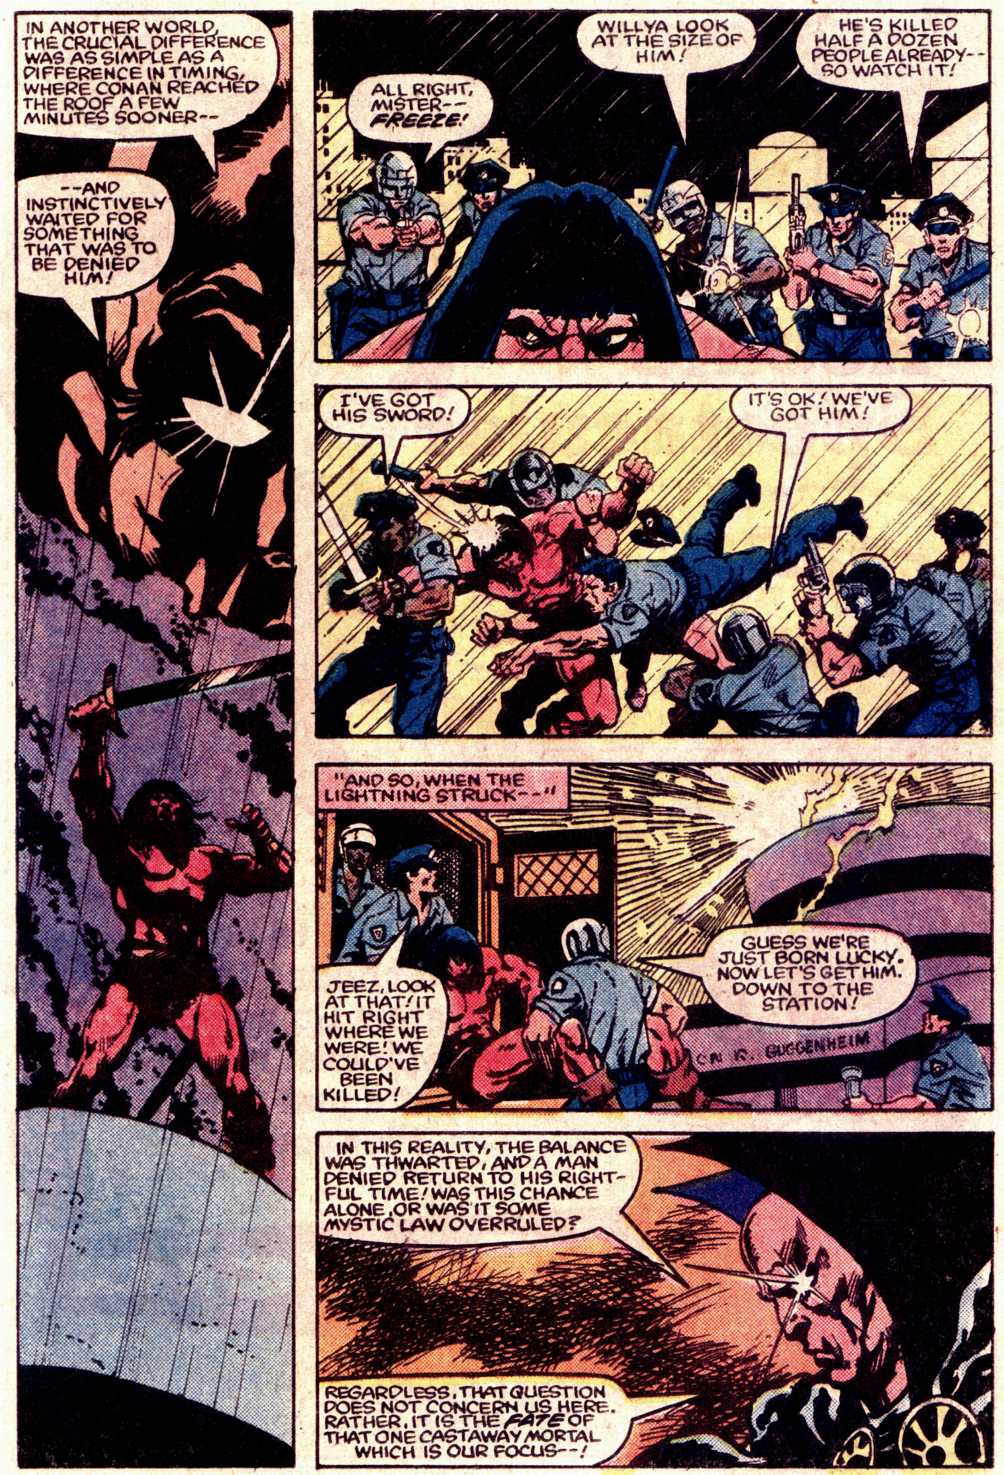 What If? (1977) issue 43 - Conan the Barbarian were stranded in the 20th century - Page 4